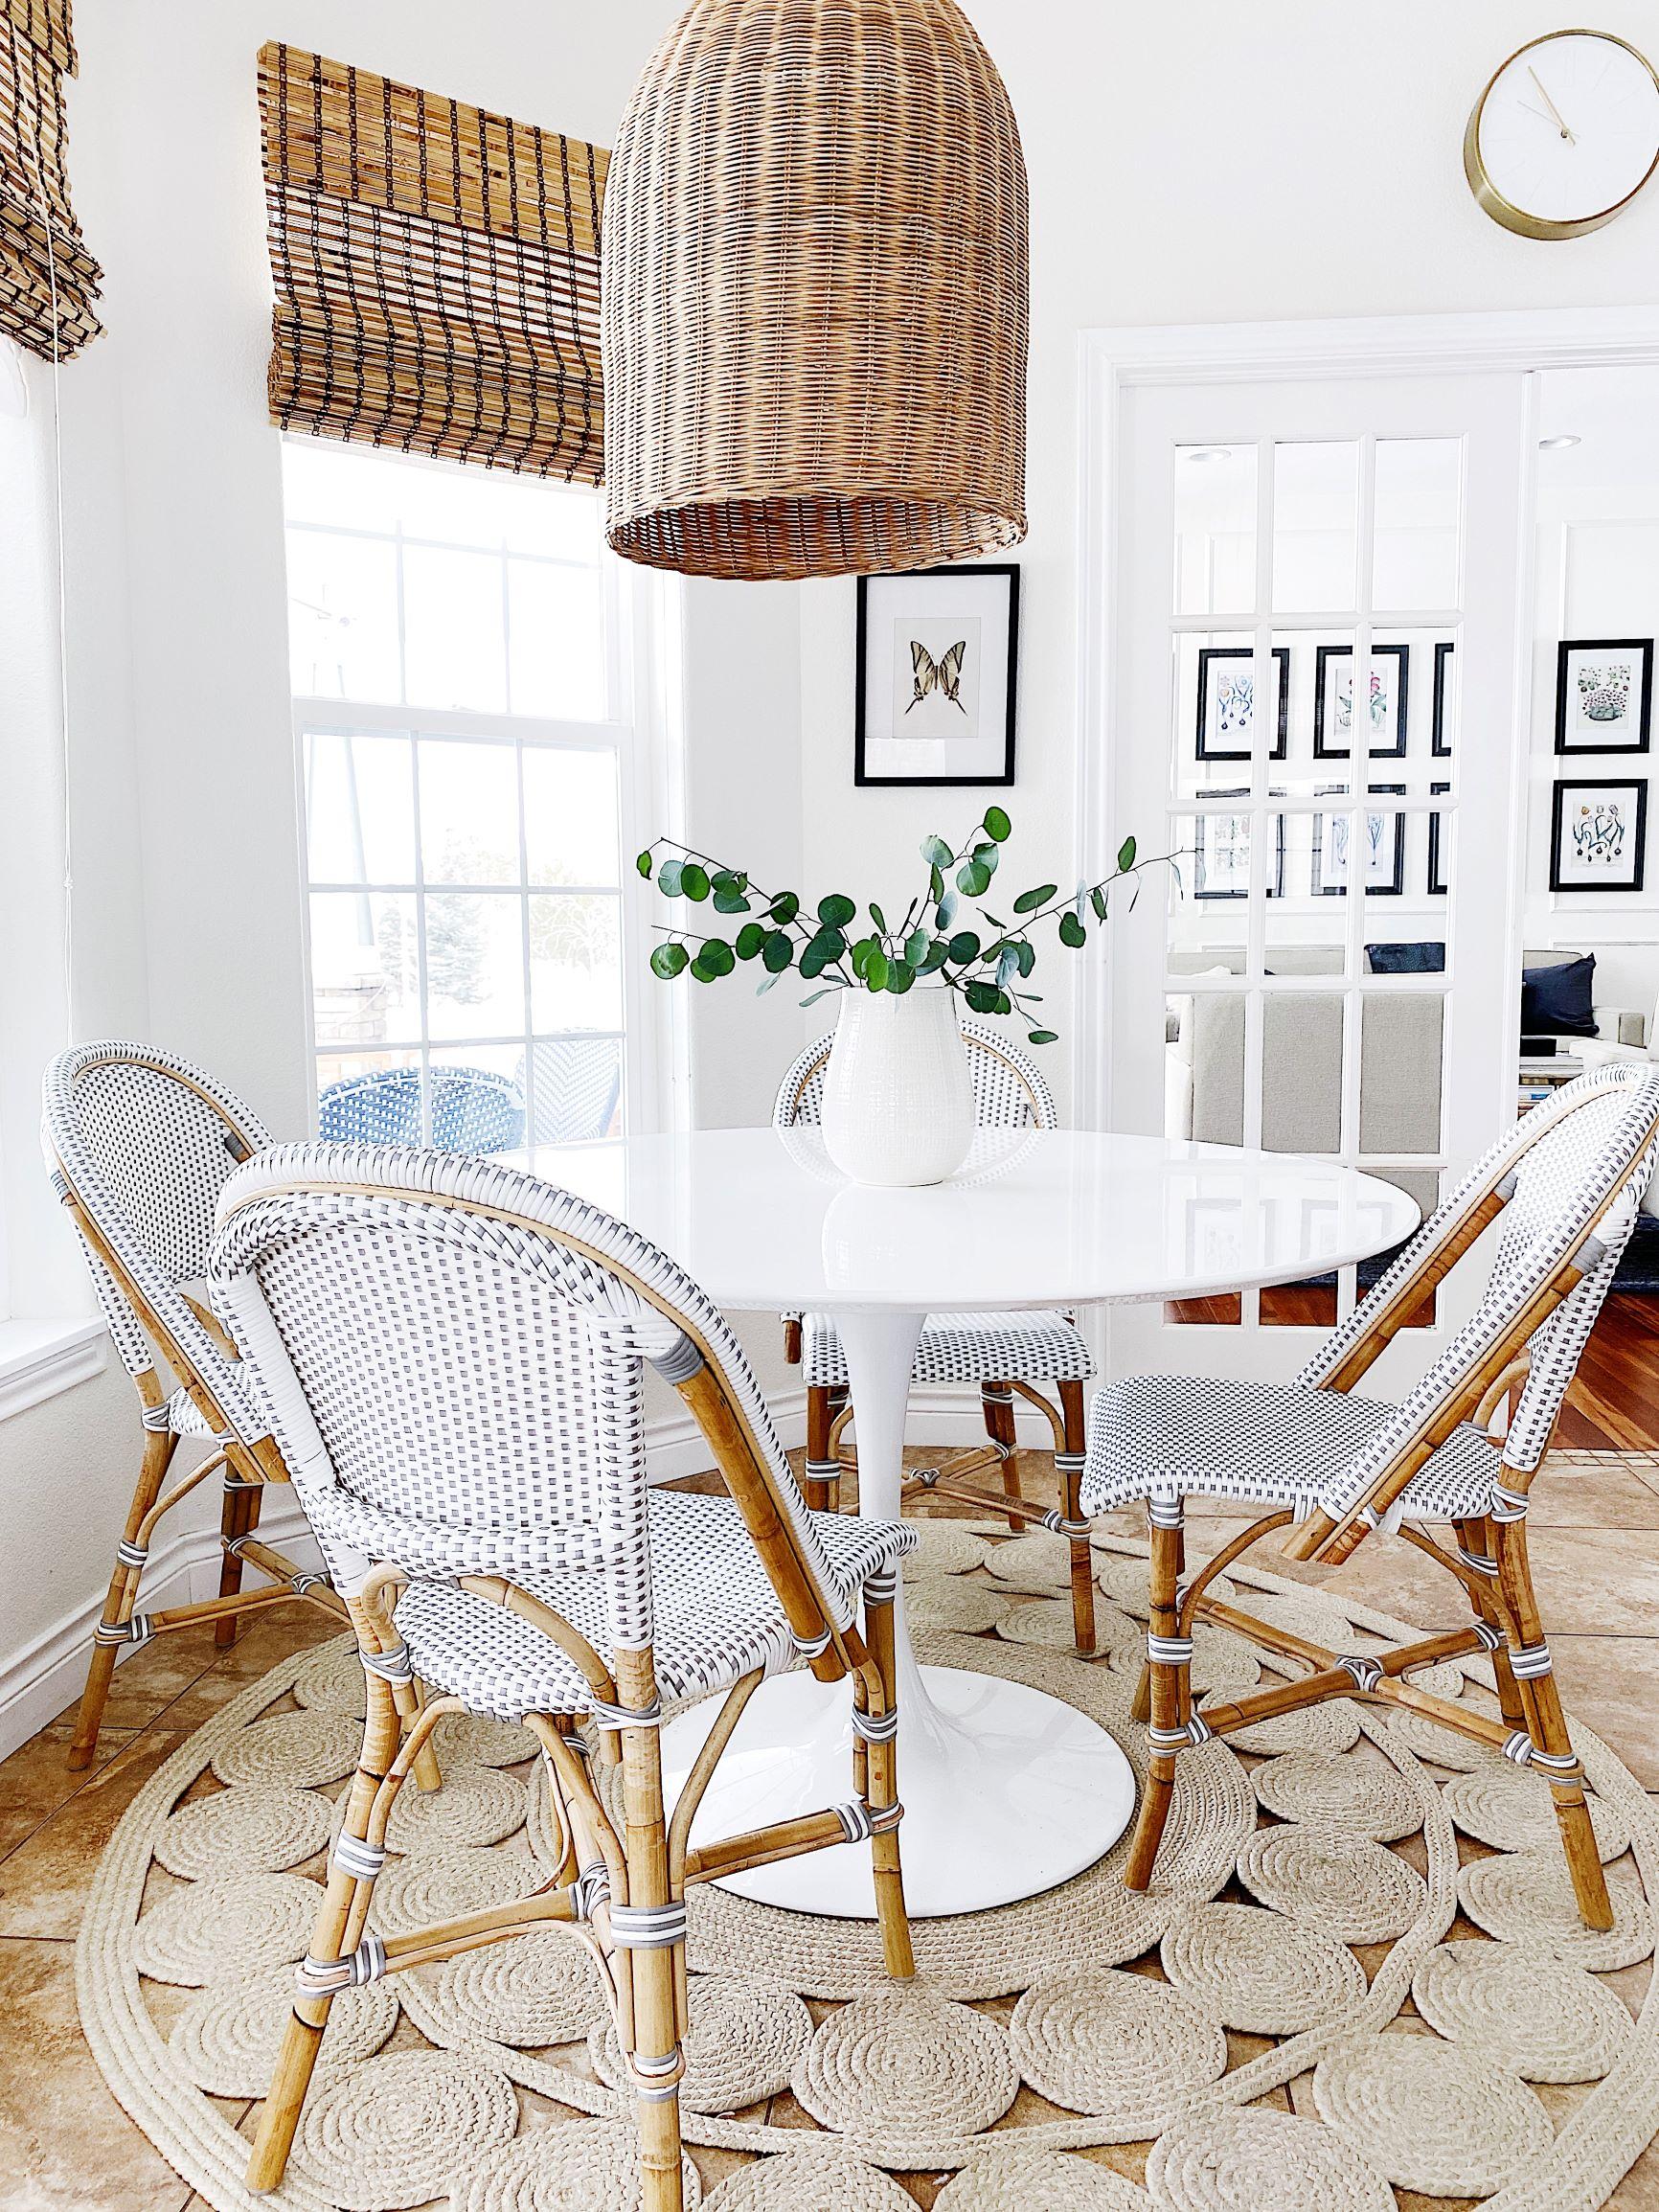 Paint colors in our home: we used Benjamin Moore White Dove in the breakfast nook - jane at home